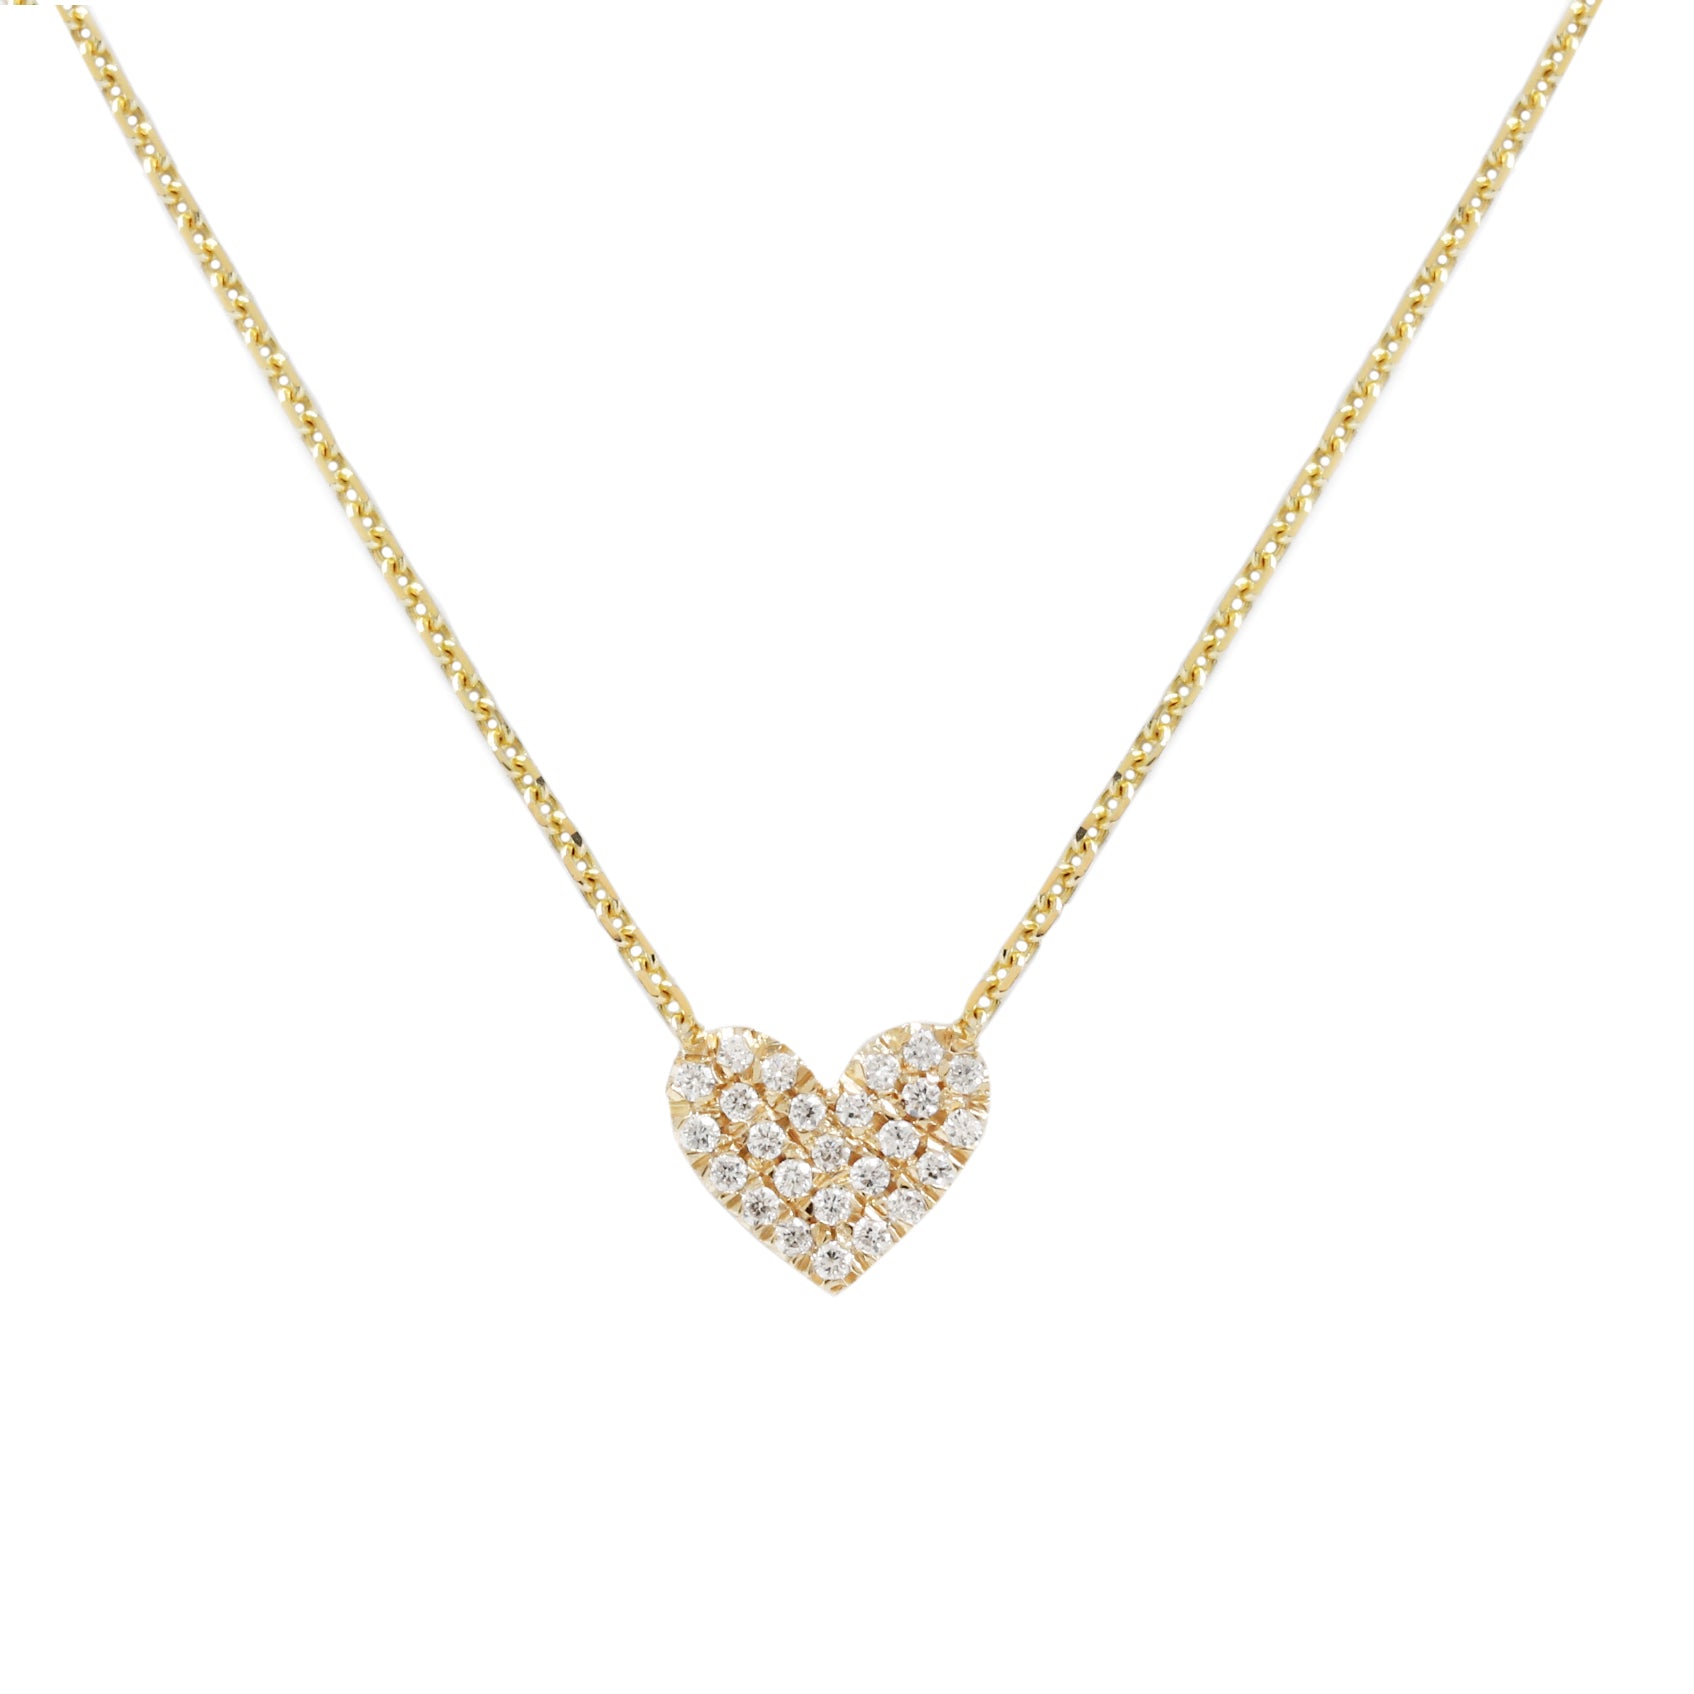 Small Pave Diamond Heart Pendant Necklace - 14K Yellow Gold, Ready to Ship